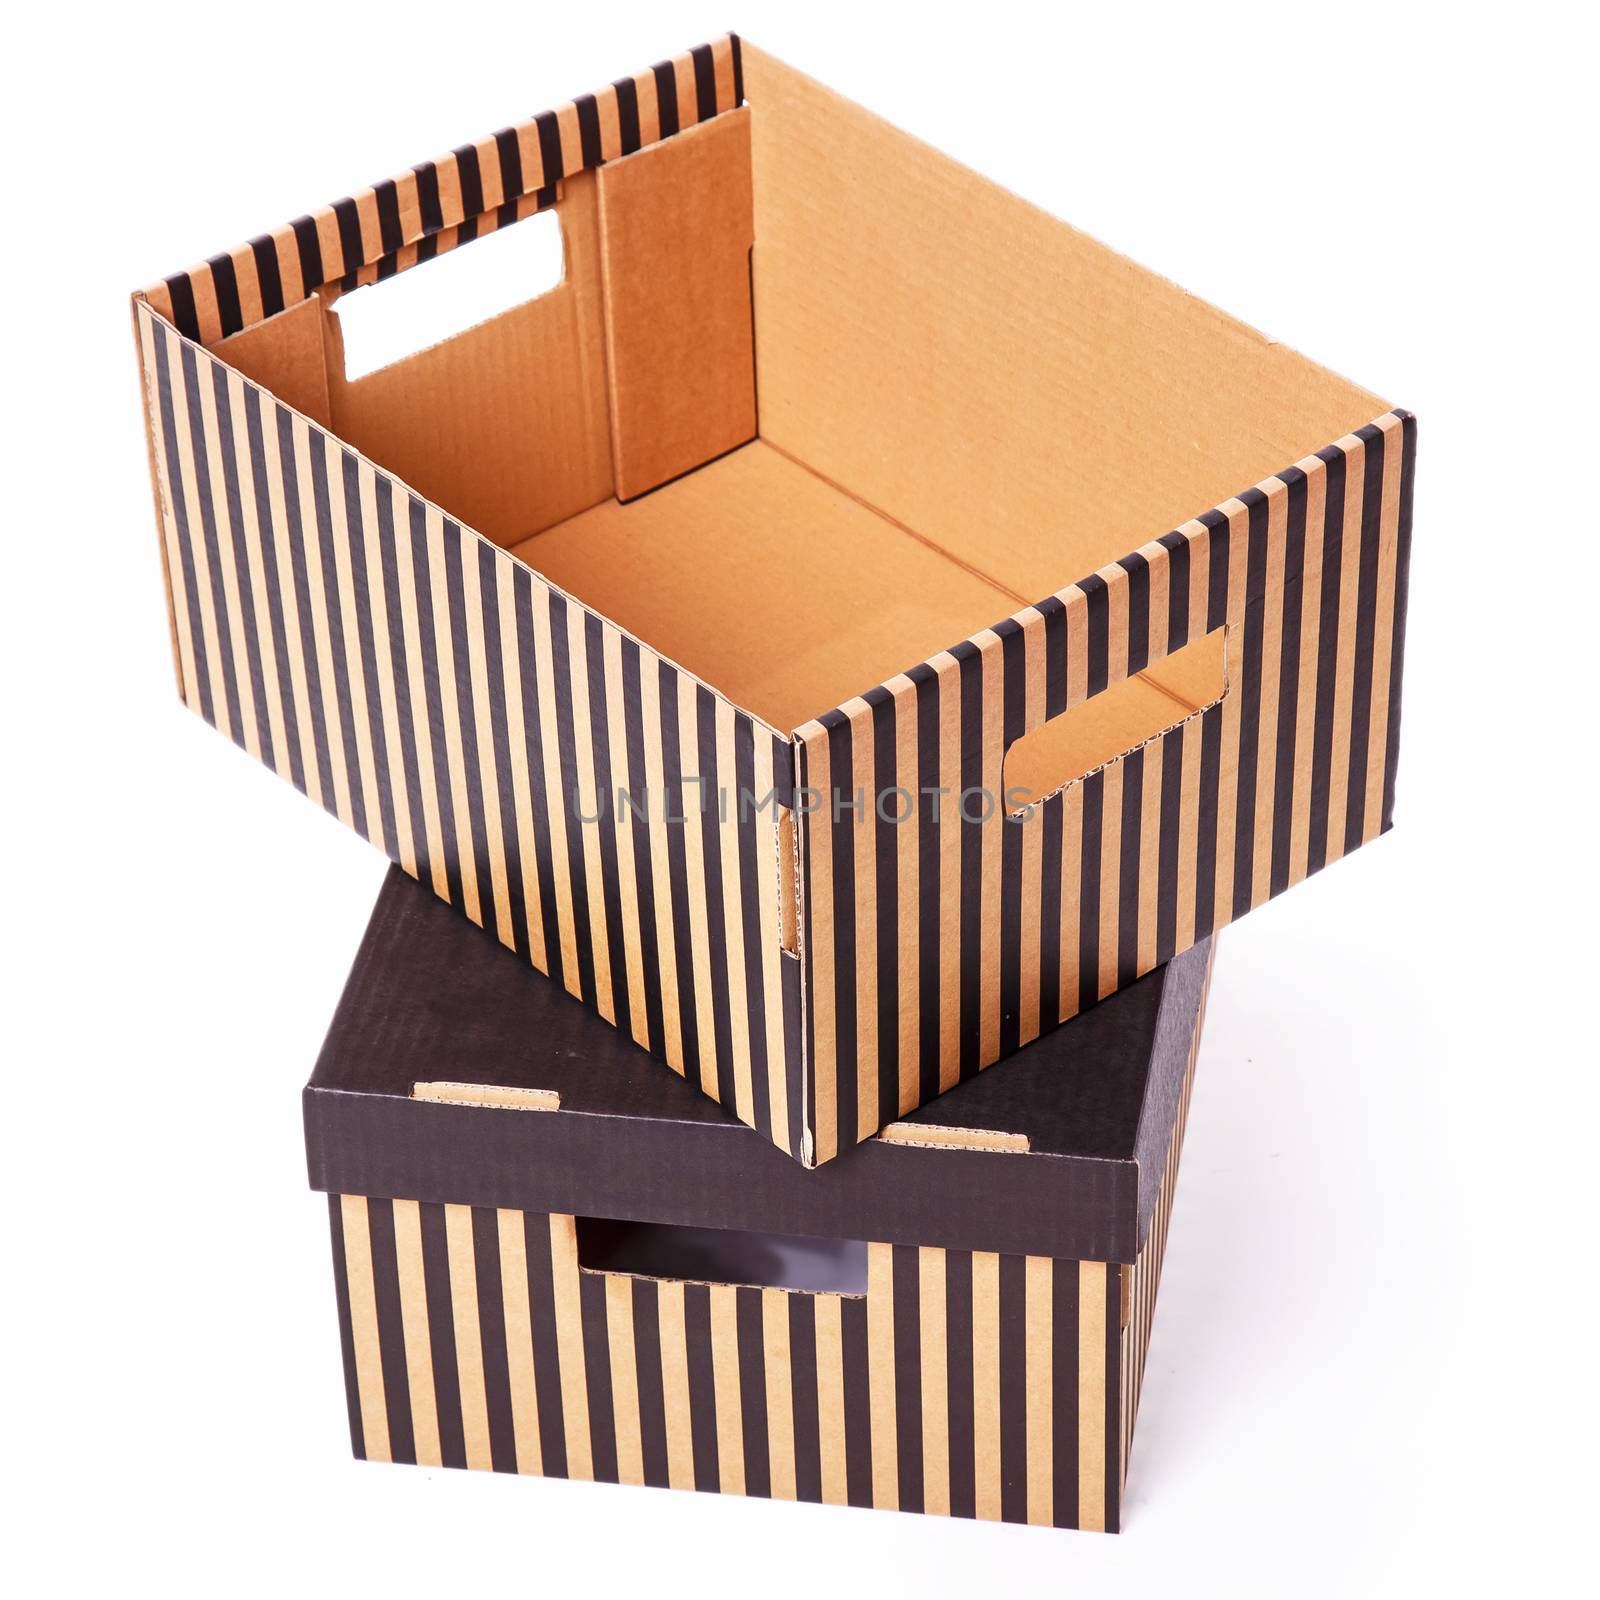 Package, delivery. Few striped boxes on a white background